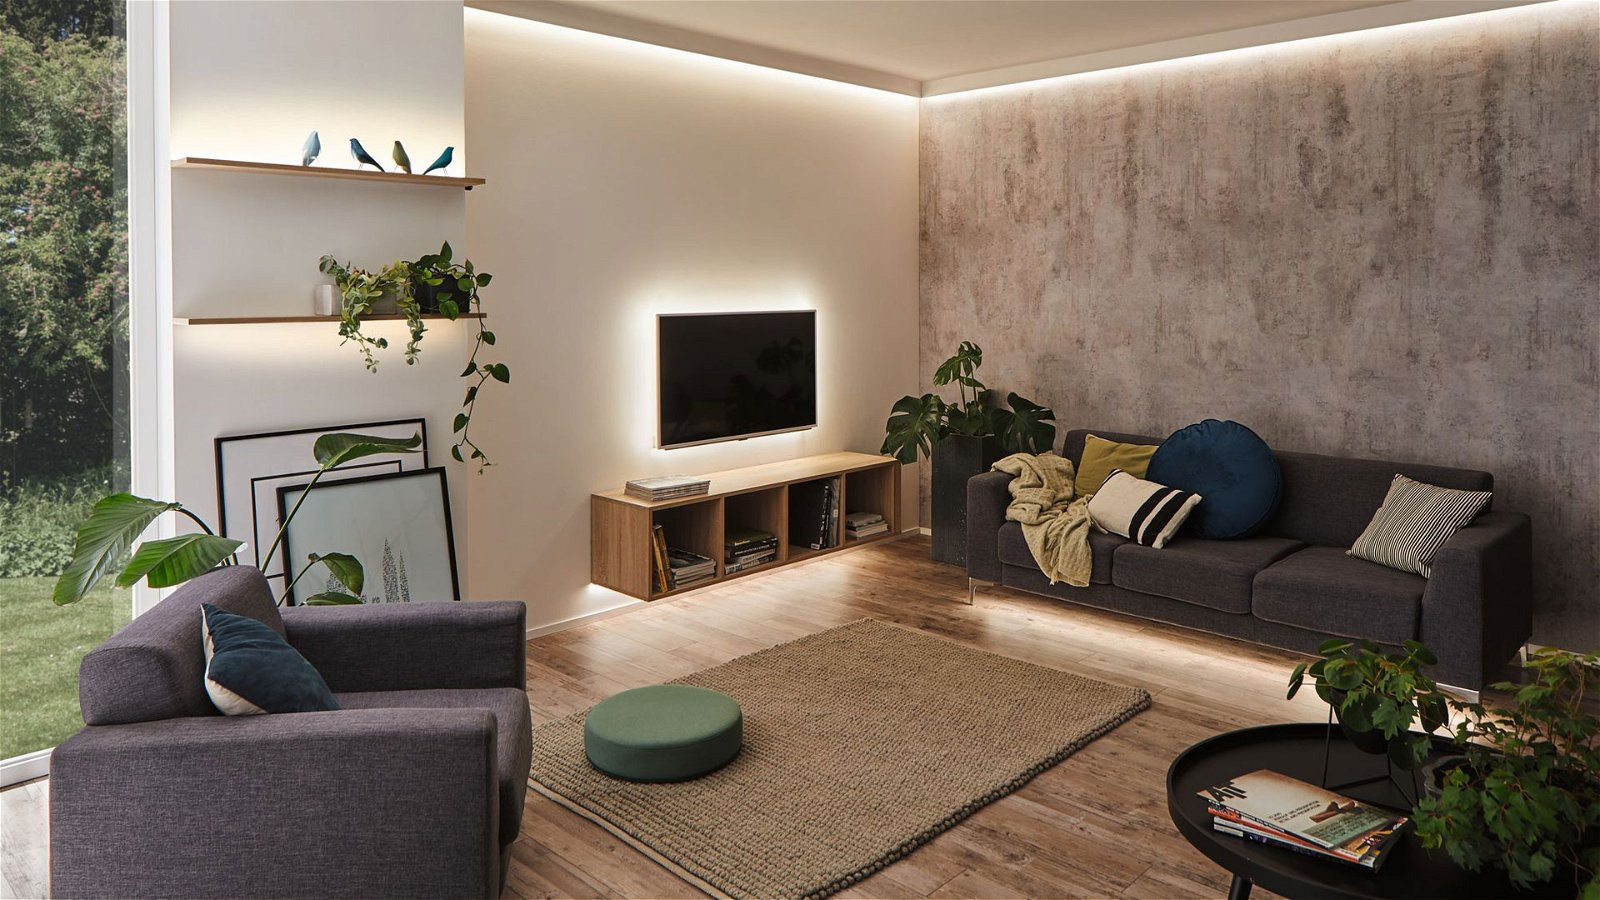 Living Room Lighting: Tips &amp; Ideas For More Ambiance with Spots Im Wohnzimmer